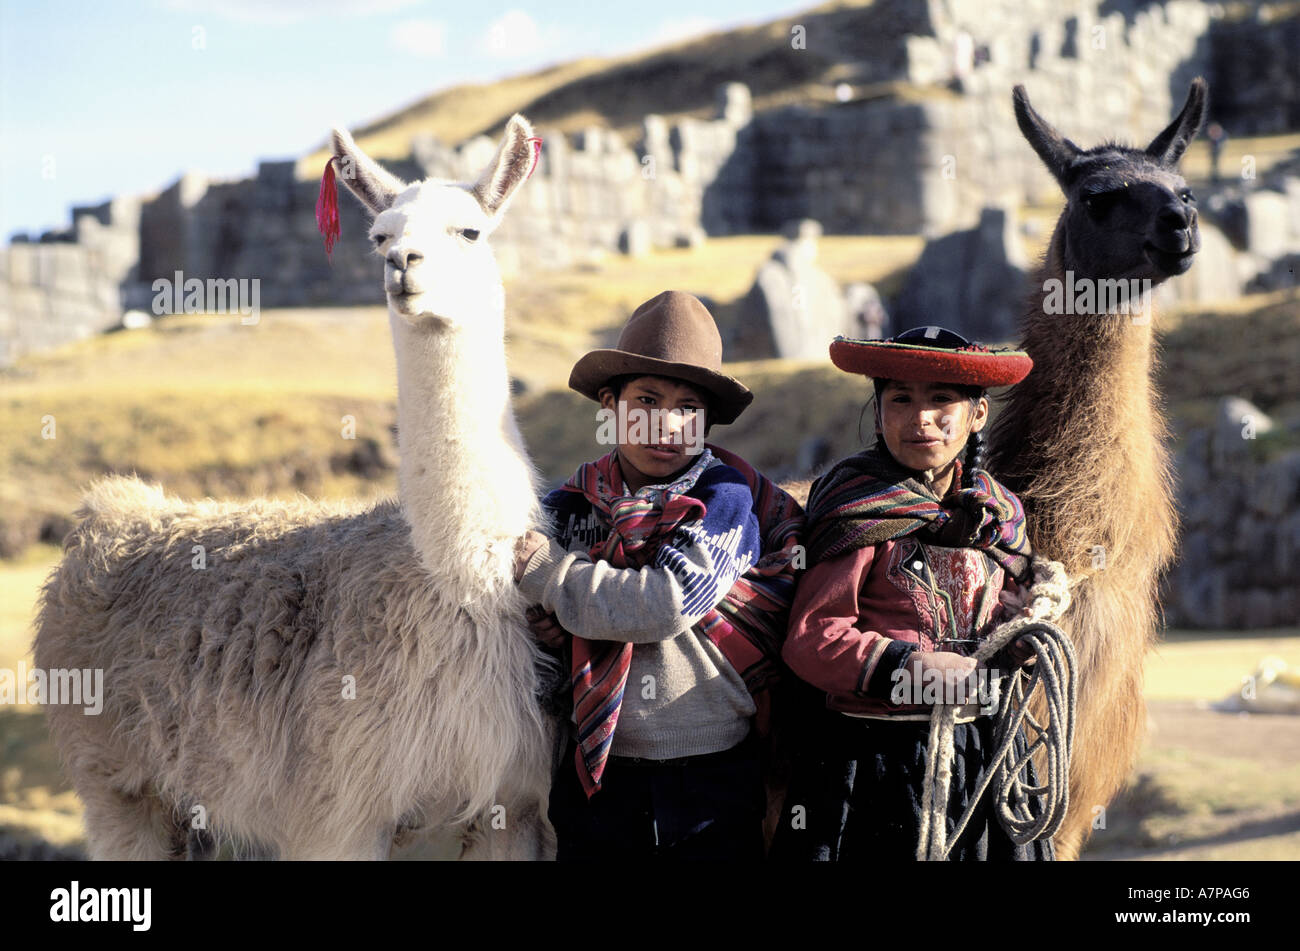 Peru, Cuzco Department, young children and their llamas in front of the Inca fortress of Sacsayhuaman Stock Photo